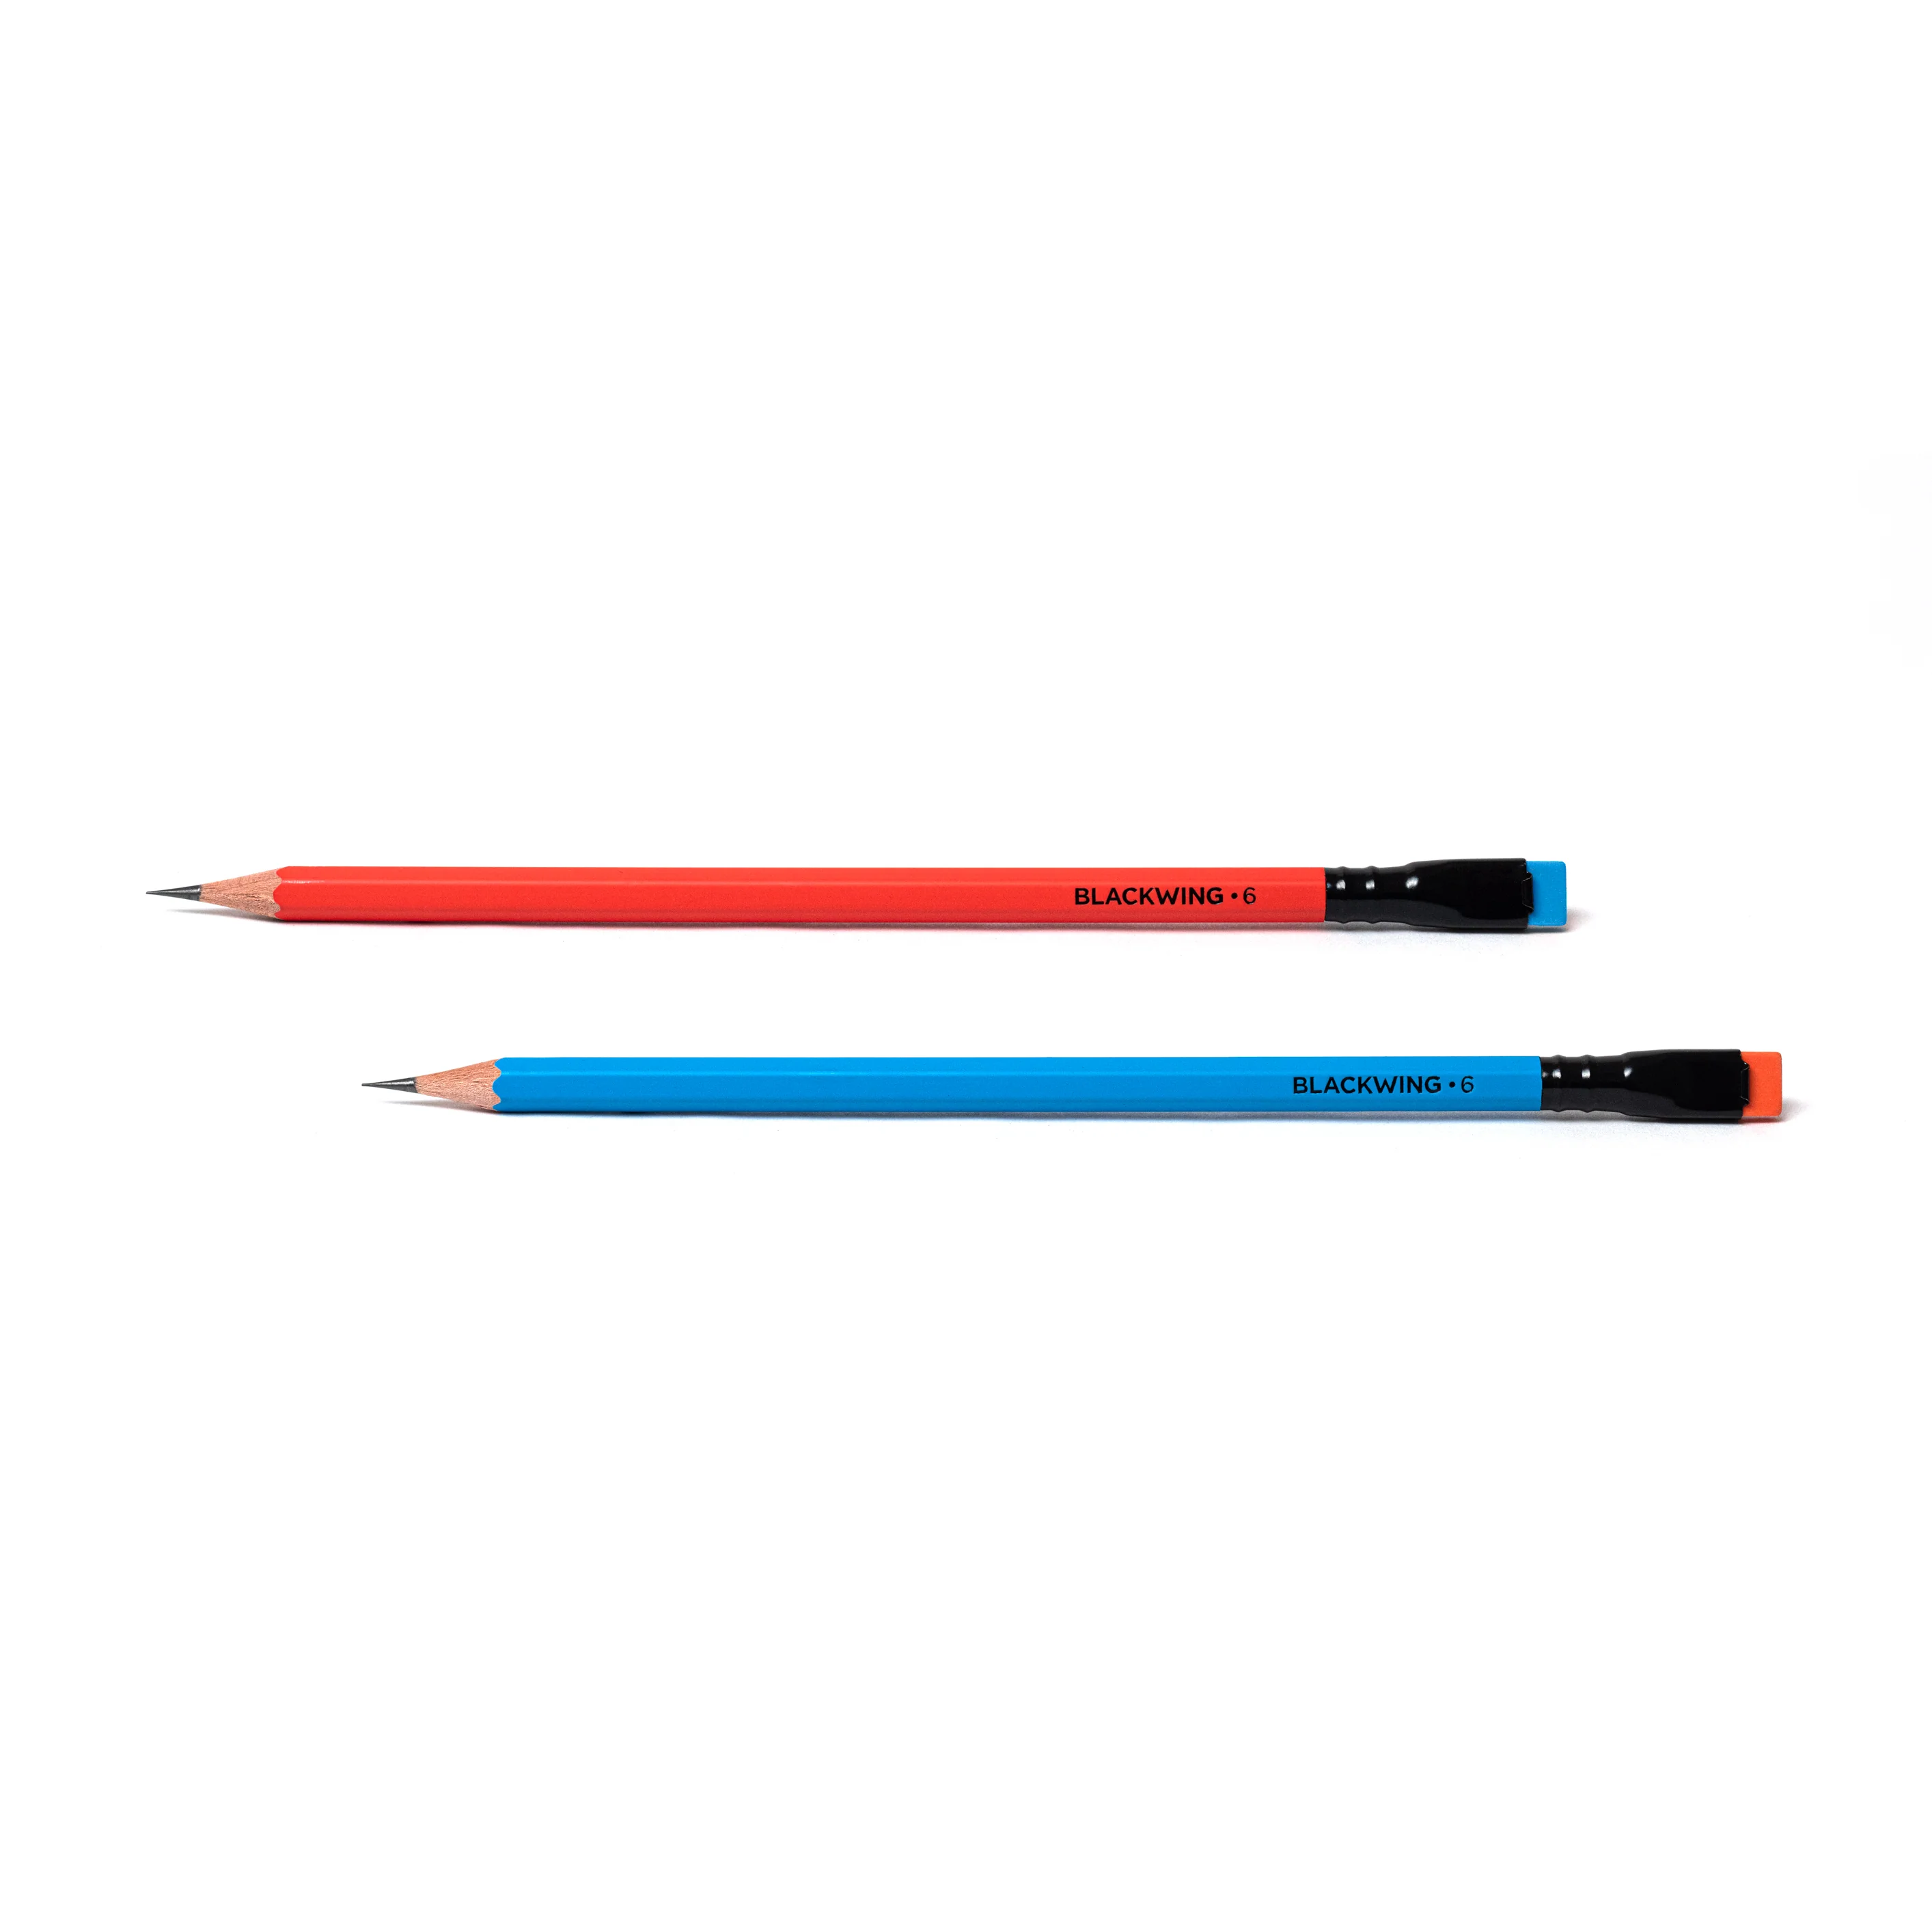 BLACKWING Bleistift Palomino orange Extra Firm - 2H - Limited Edition